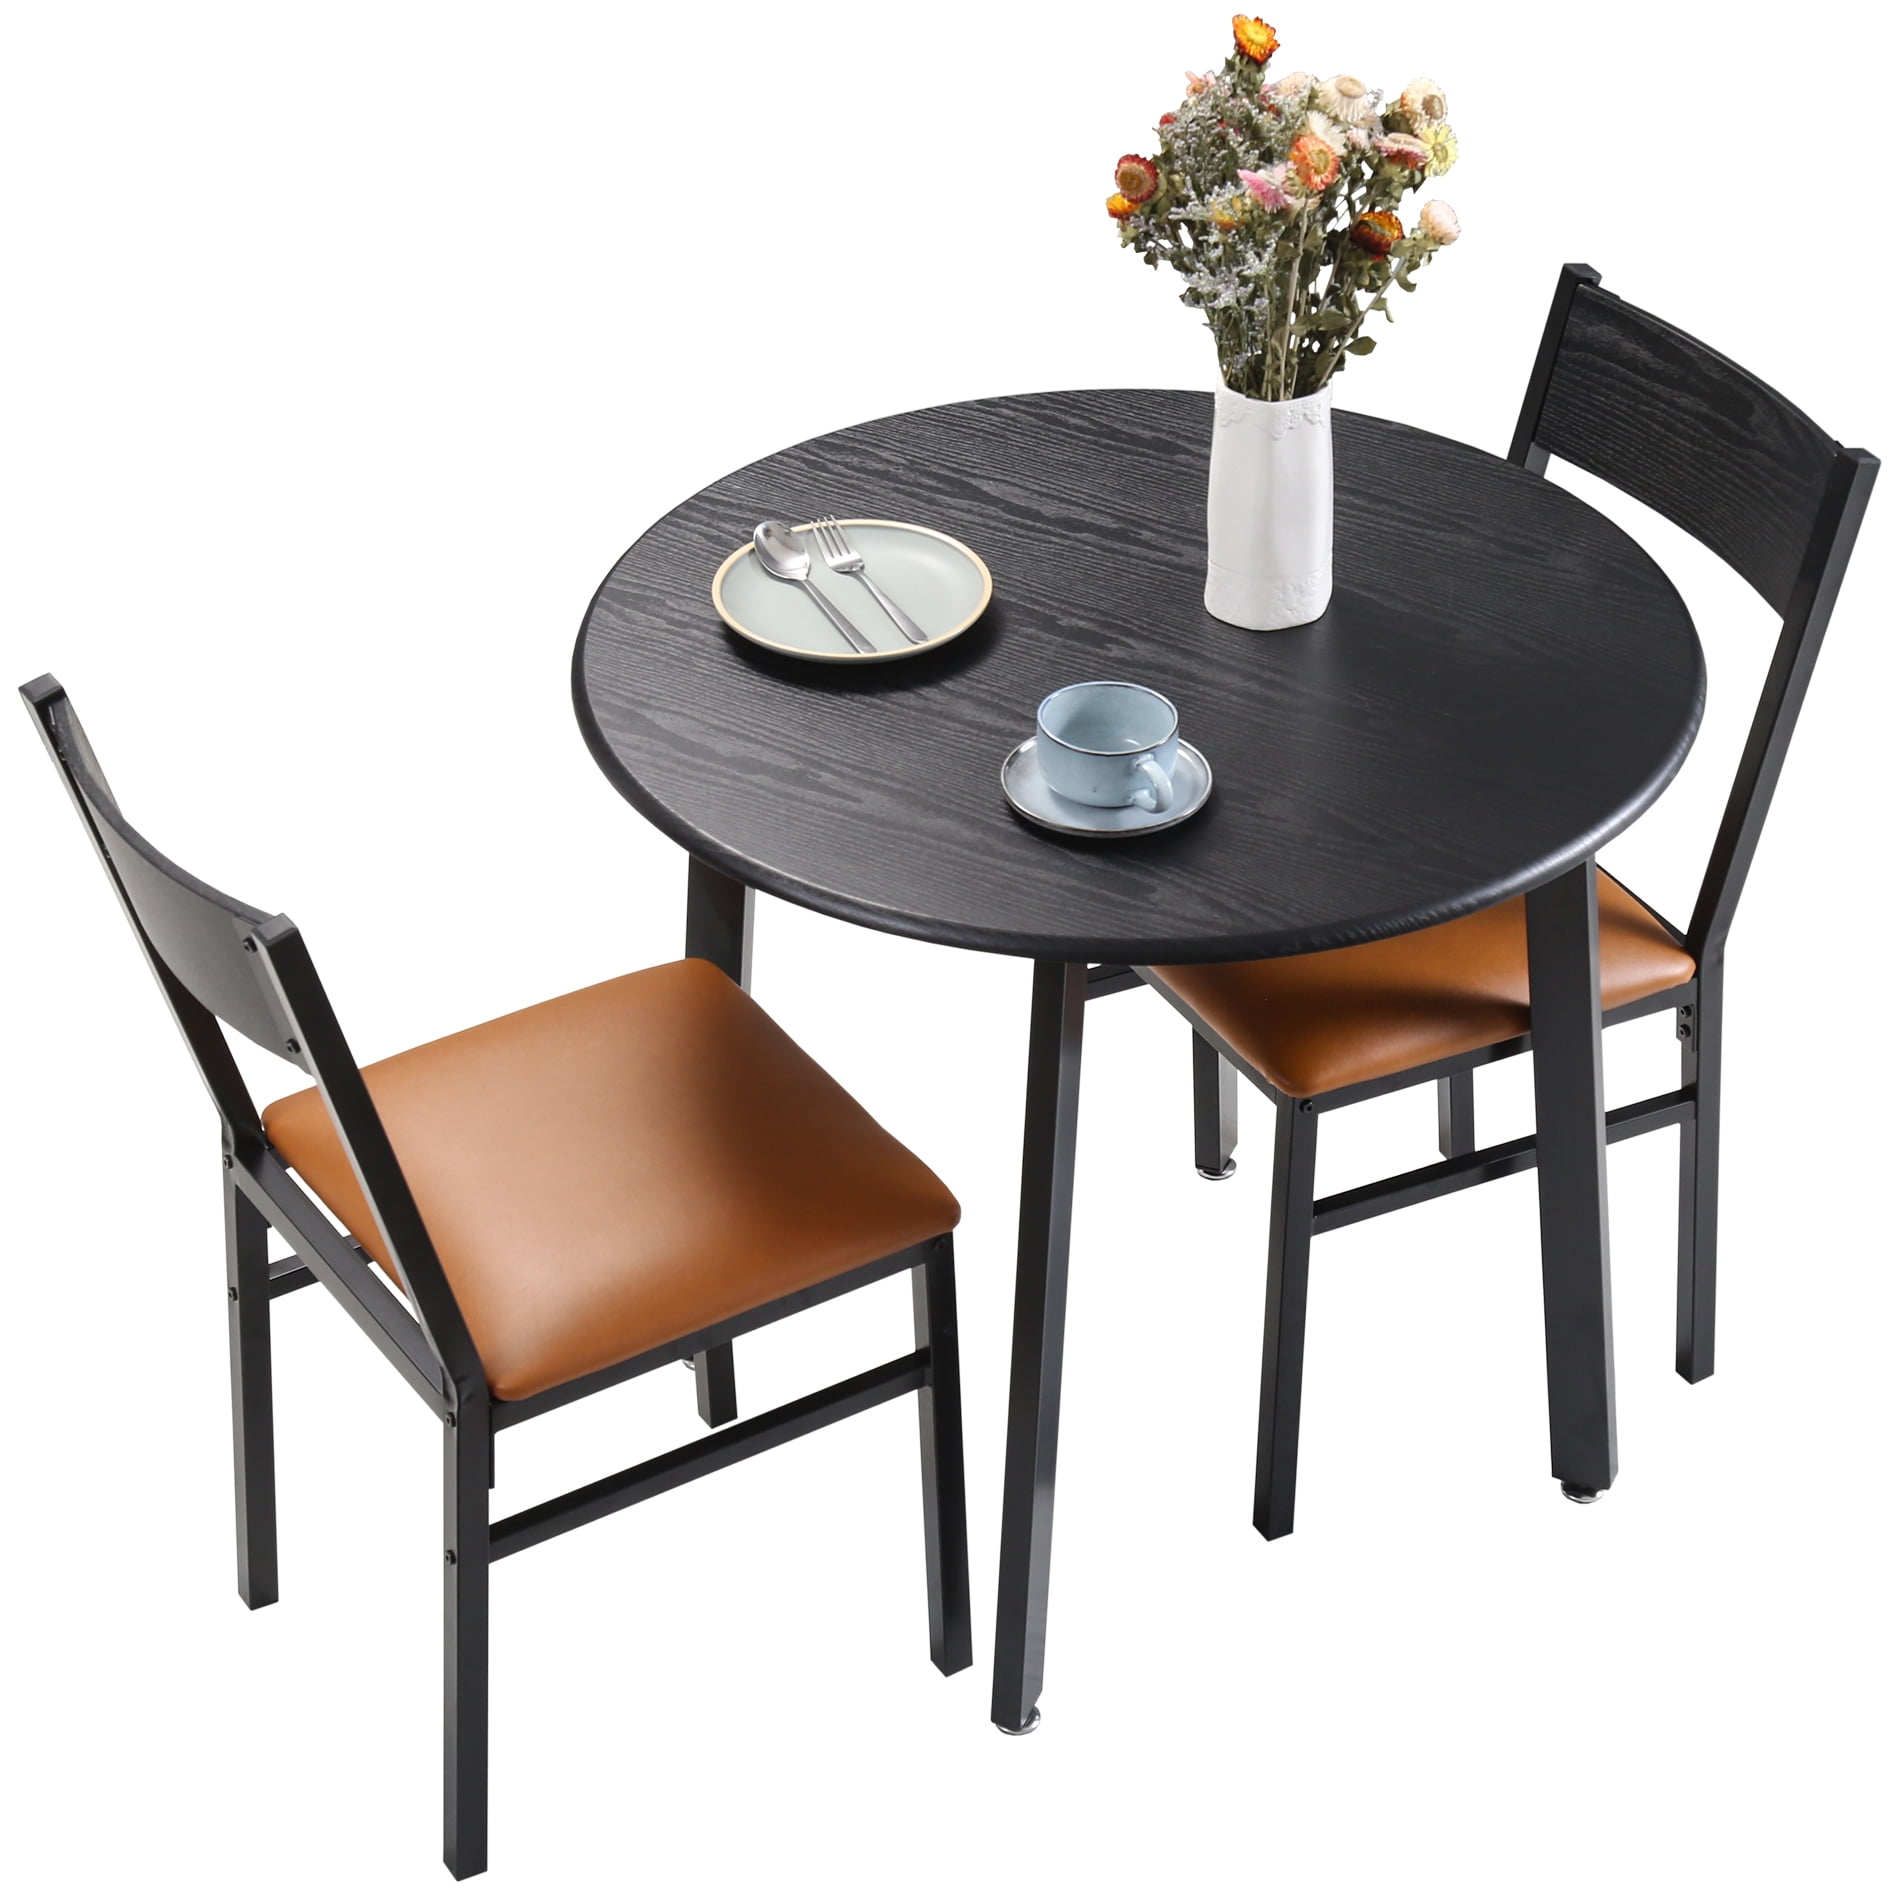 3 Piece Round Dining Table Set With, Kitchen Round Table And Chairs Set